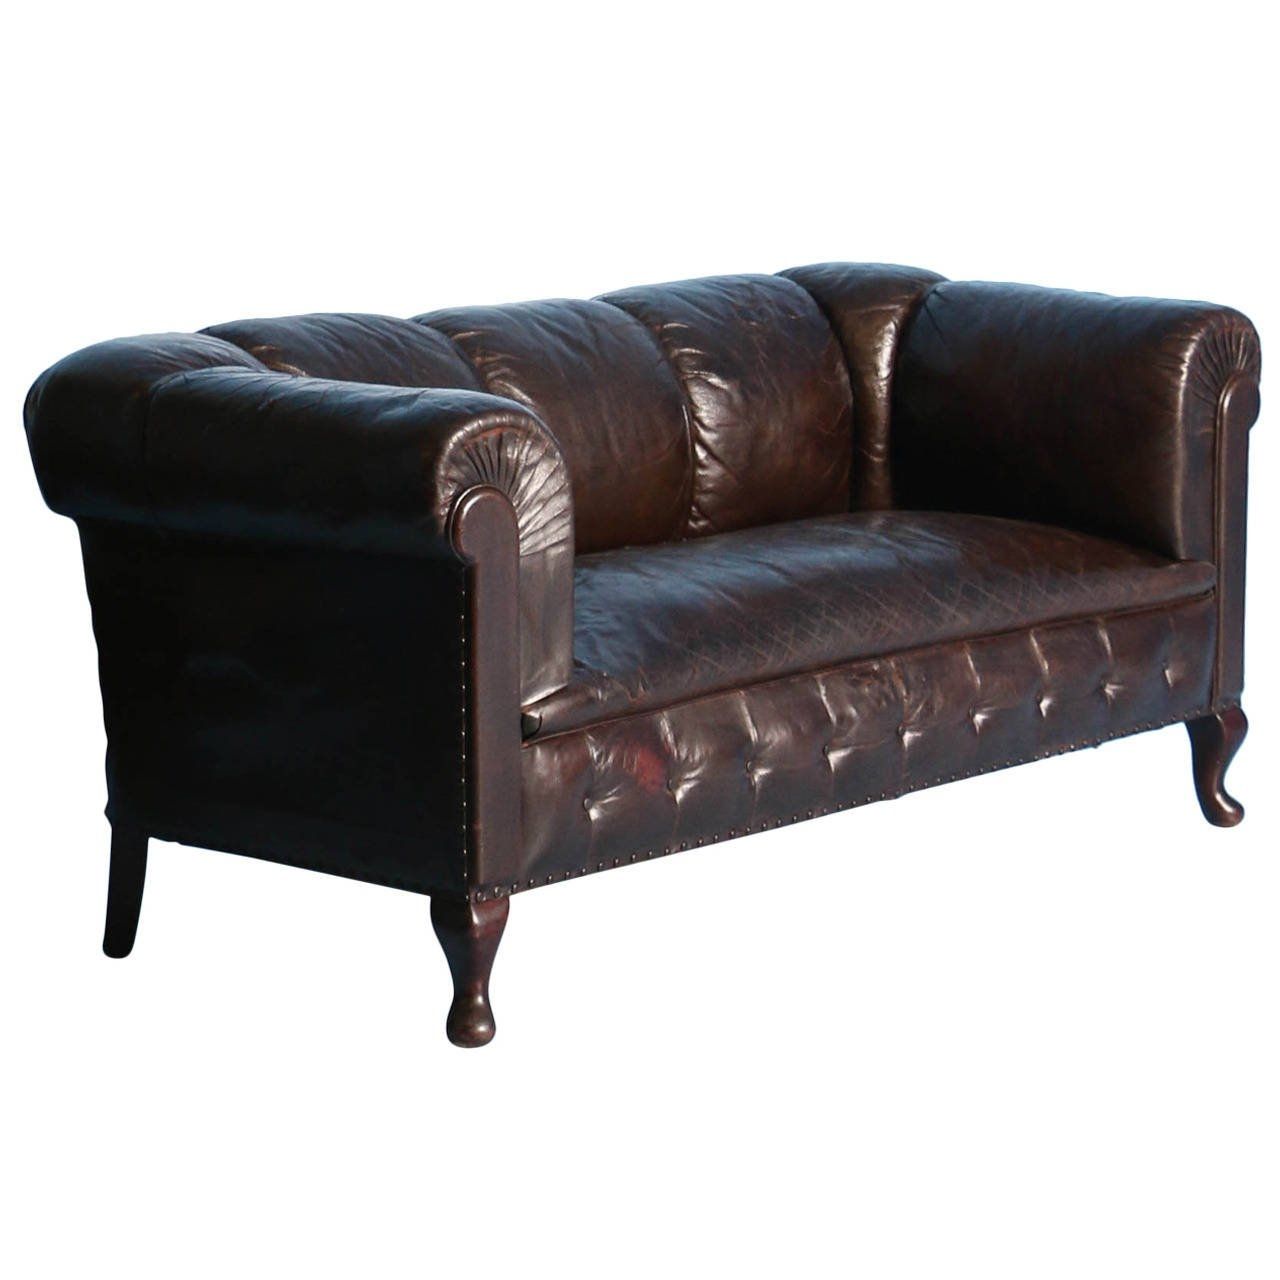 Small Vintage Chesterfield Sofa England Circa 1920 1940 At 1stdibs With Regard To Small Chesterfield Sofas (View 6 of 15)